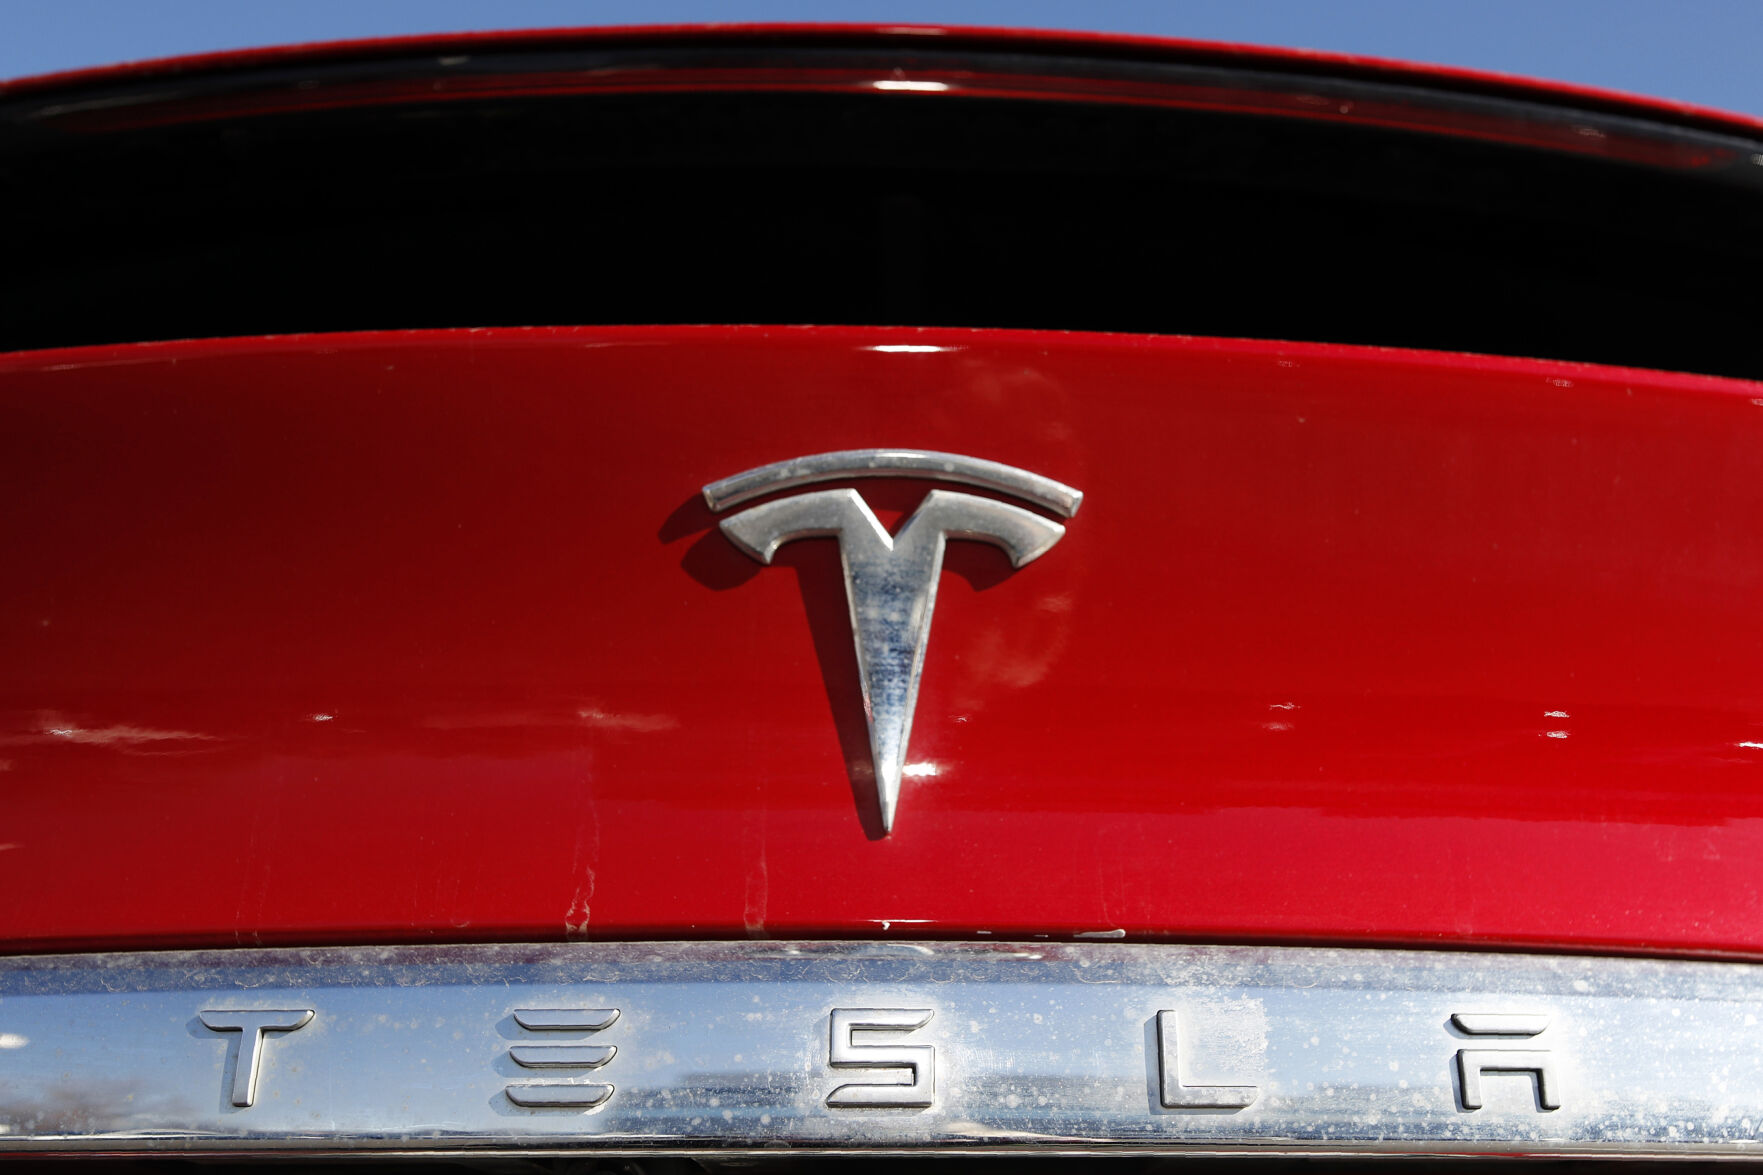 <p>FILE - The Tesla company logo is shown at a Tesla dealership in Littleton, Colo. Feb. 2, 2020. Tesla said in its safety recall report that is recalling nearly 16,000 of its 2021-2023 Model S and Model X vehicles because some front-row seat belts may not have been reconnected properly following a repair. (AP Photo/David Zalubowski, File)</p>   PHOTO CREDIT: David Zalubowski 